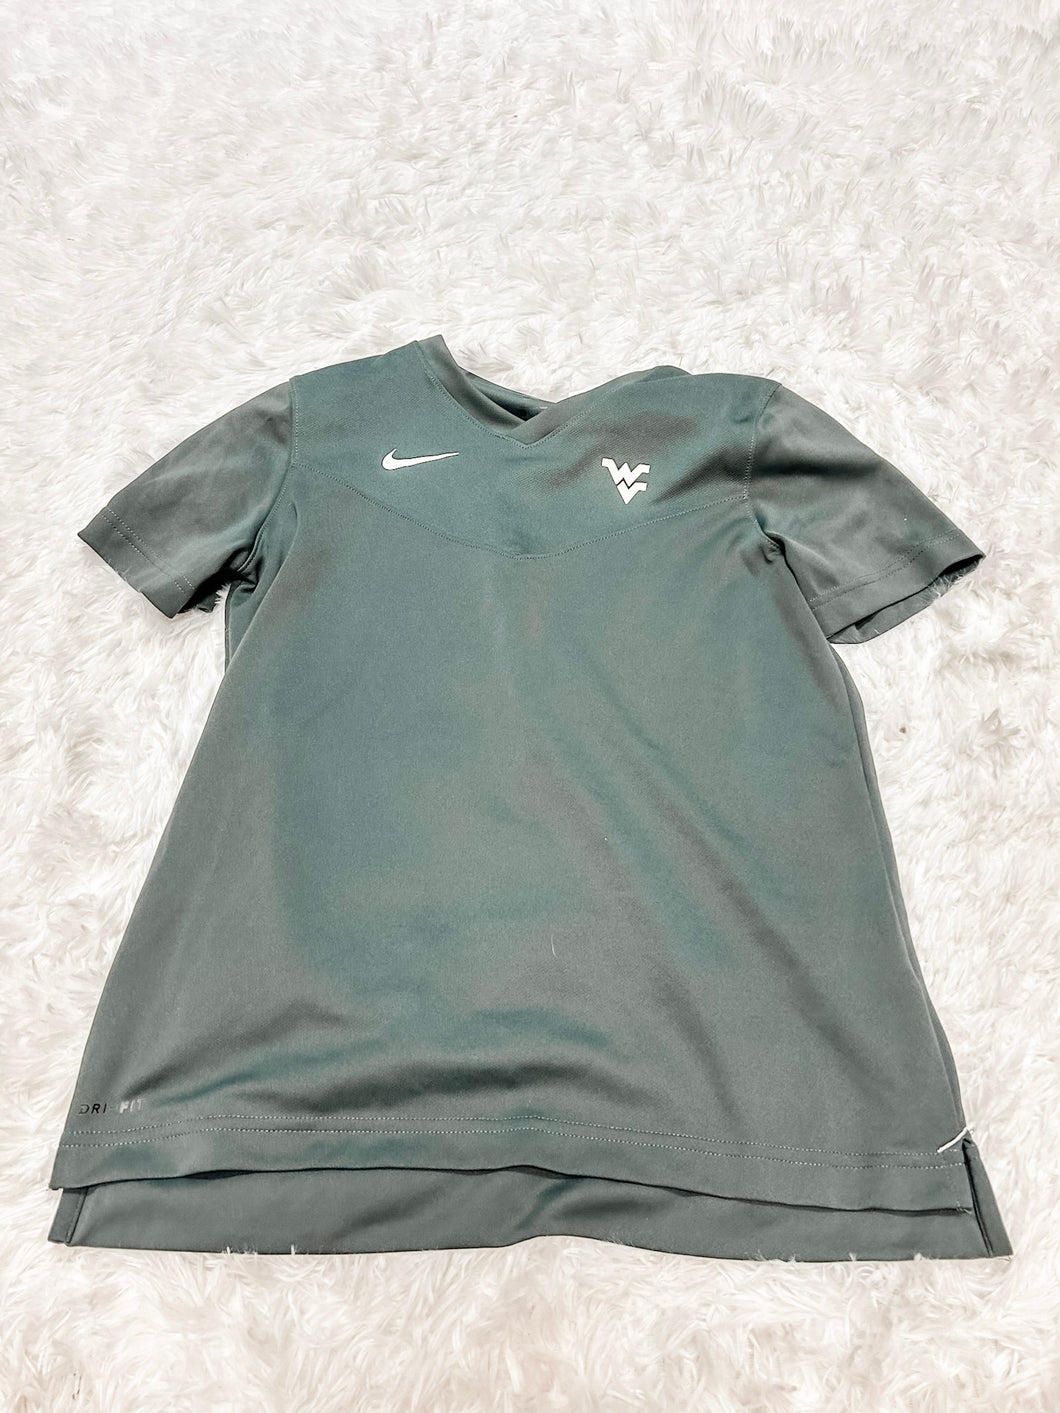 Nike Athletic Top Size Small M0378